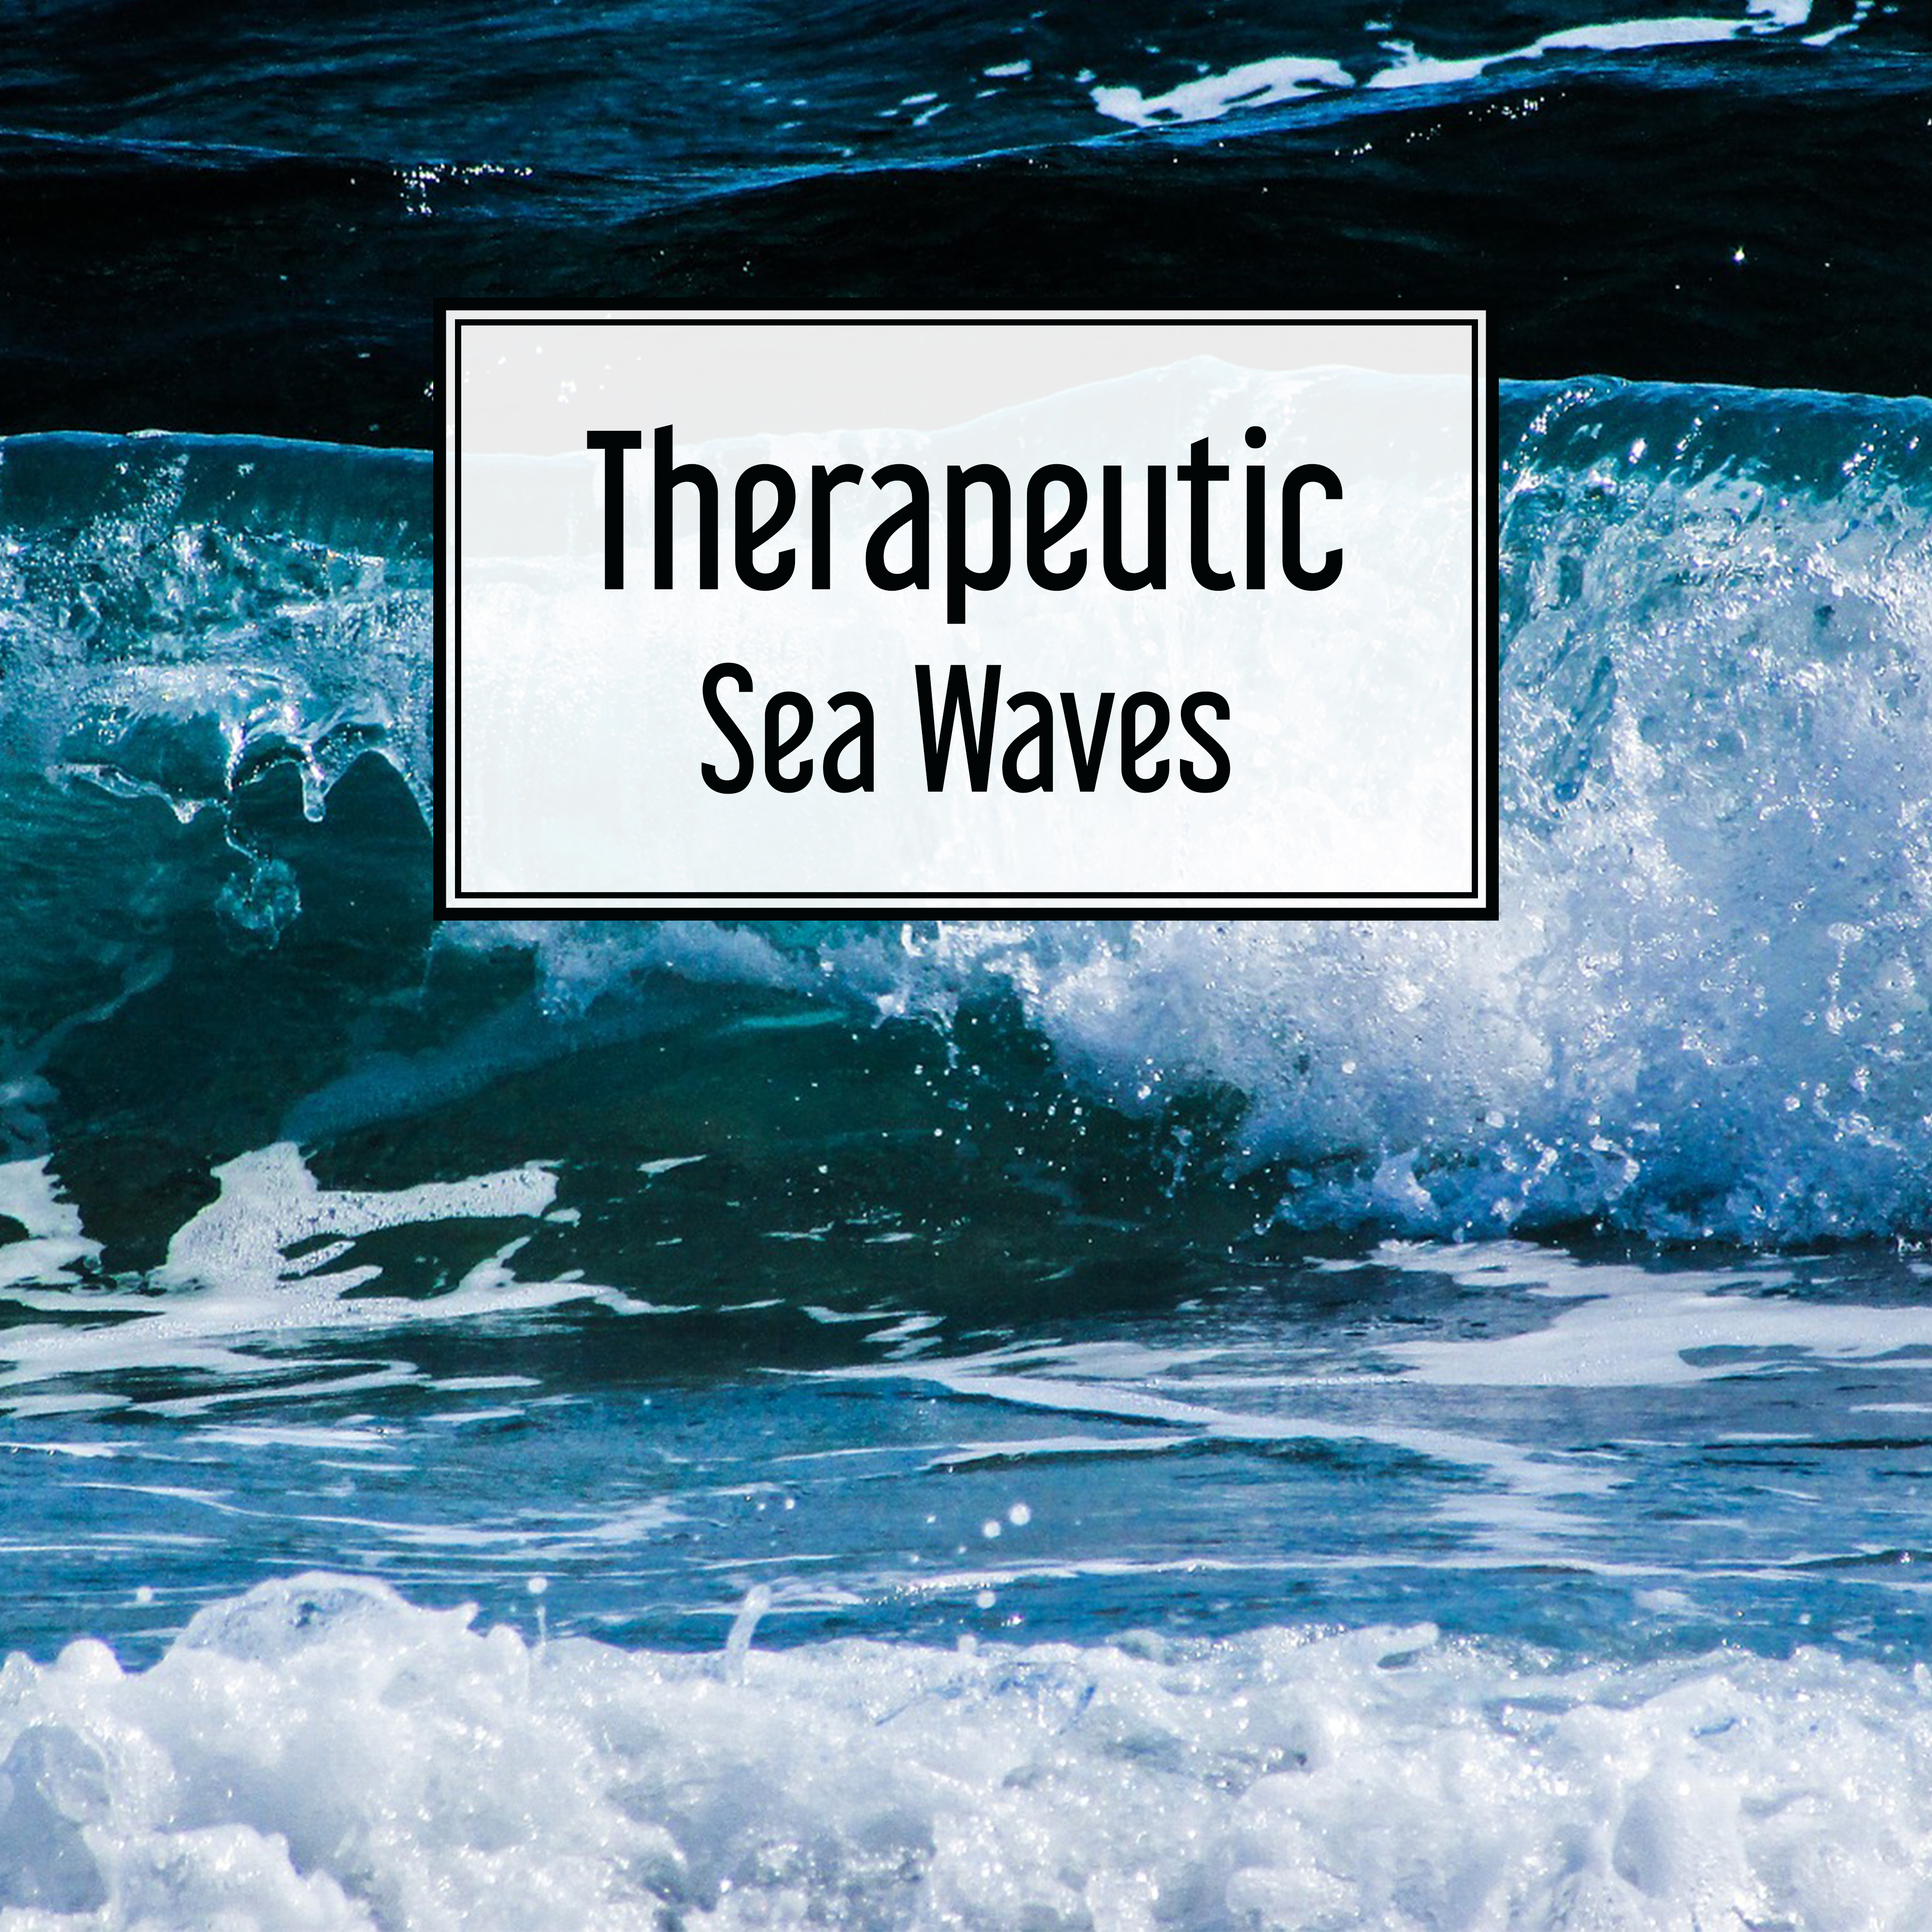 Therapeutic Sea Waves – Waterfall Sounds, New Age for Deep Relaxation, Inner Silence, Nature Waves of Calmness